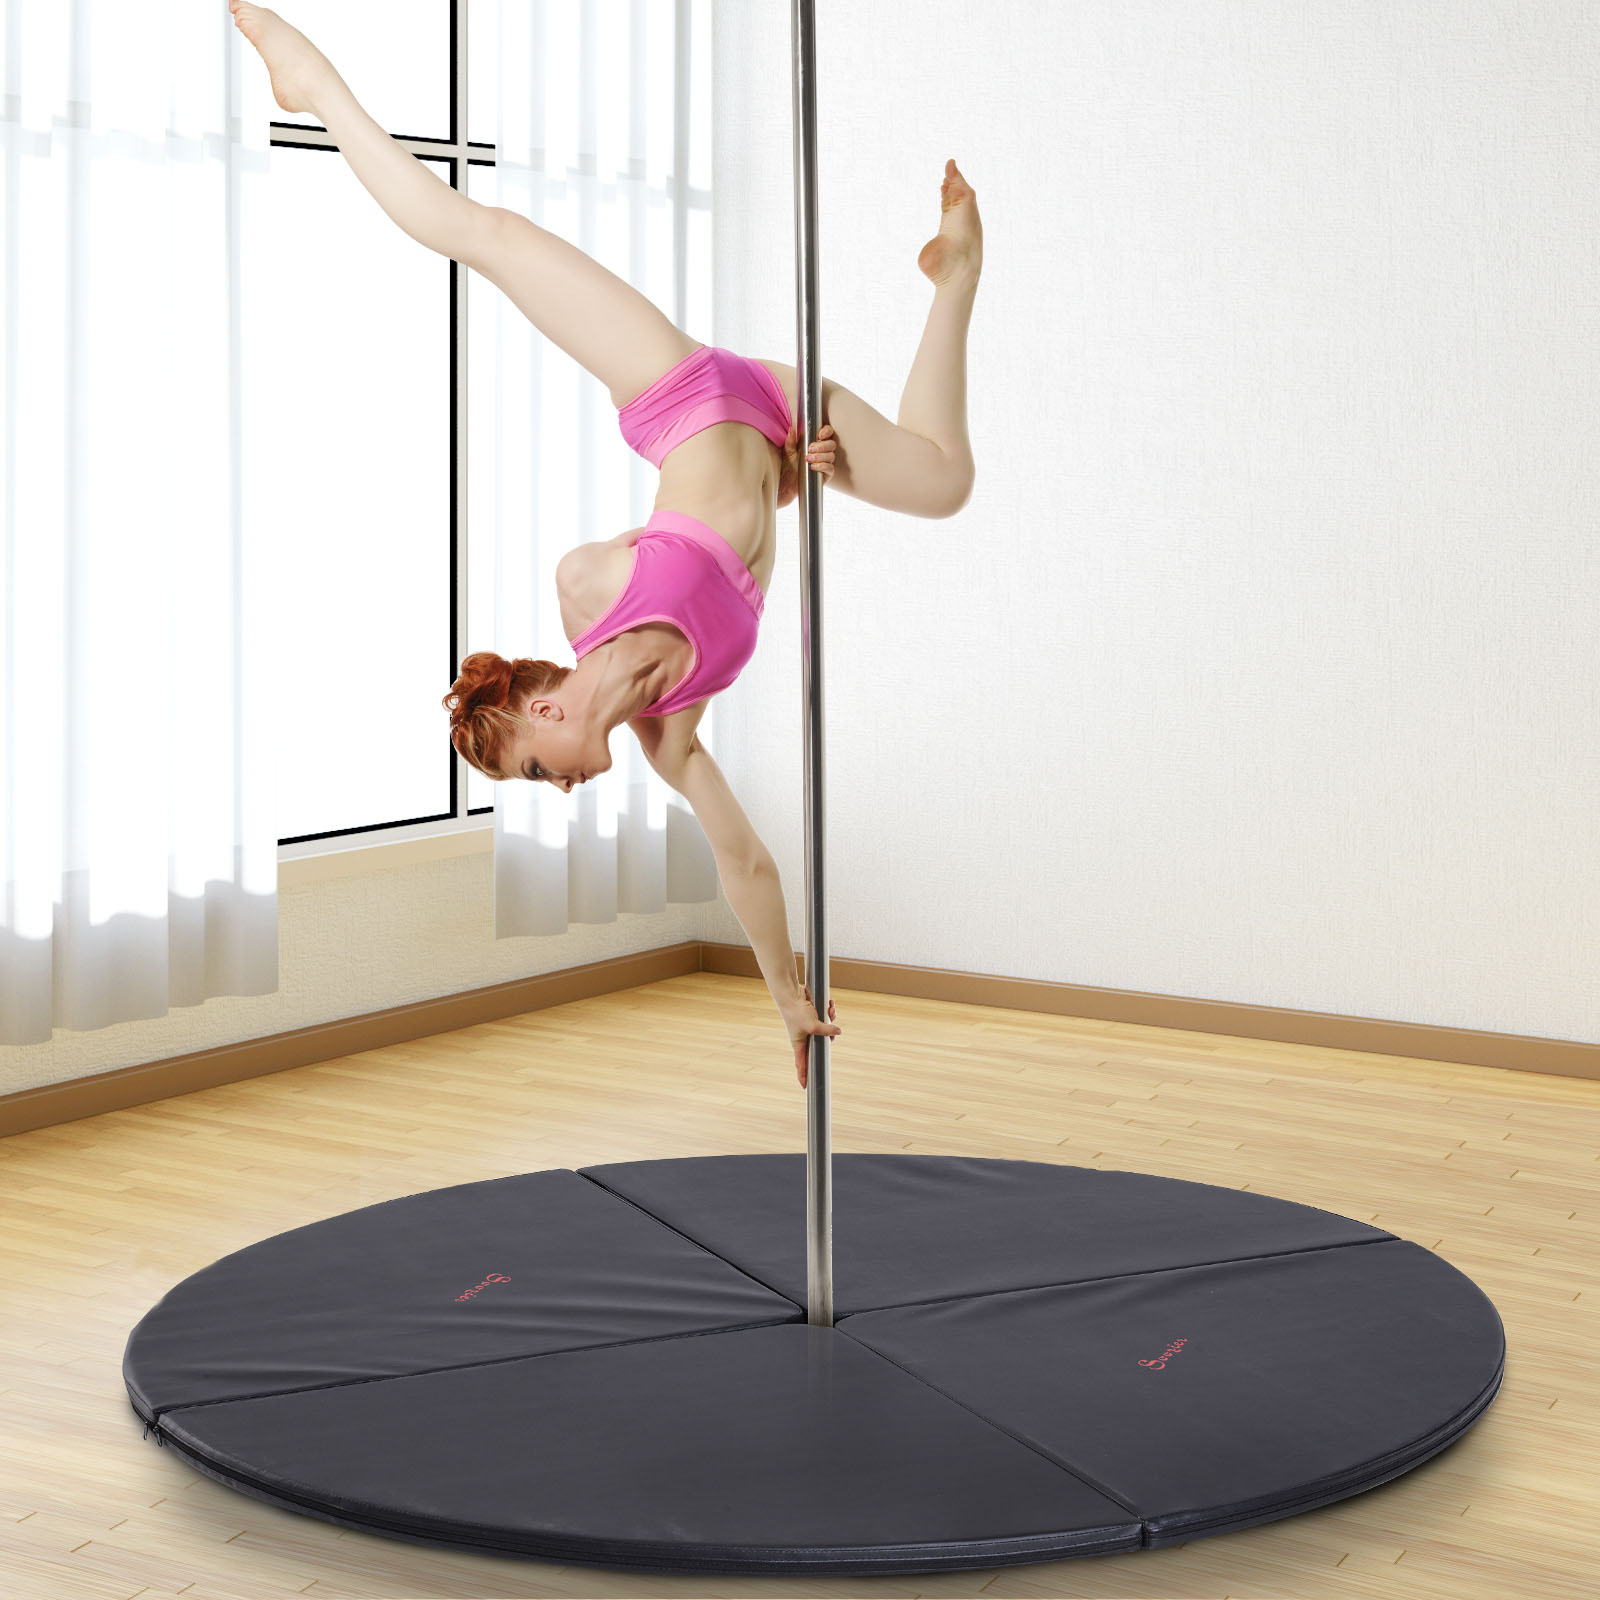 Soozier Pole Dance Mat, 2"T x 5'W Folding Pole Dance Mat for Home, Lightweight and Foldable, Black - image 2 of 9